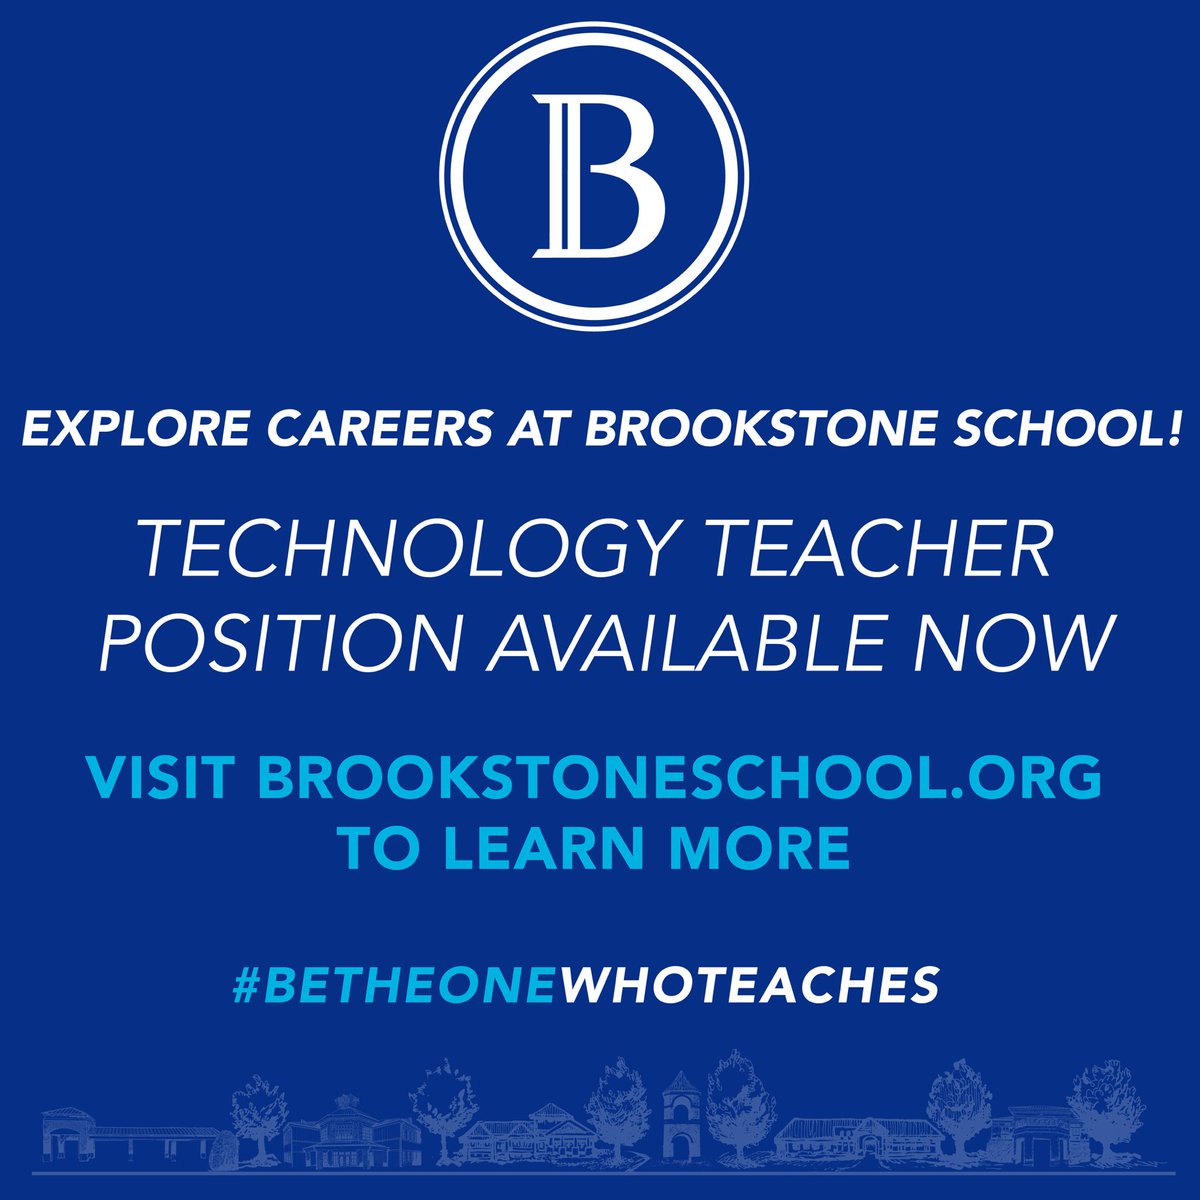 Want to join the most wonderful group of faculty teaching the most amazing students? Join us here at Brookstone! We have a Technology Teacher position available now! Visit our website for more information. #BeTheOneWhoTeaches #WhyBrookstone brookstoneschool.org/about-brooksto…